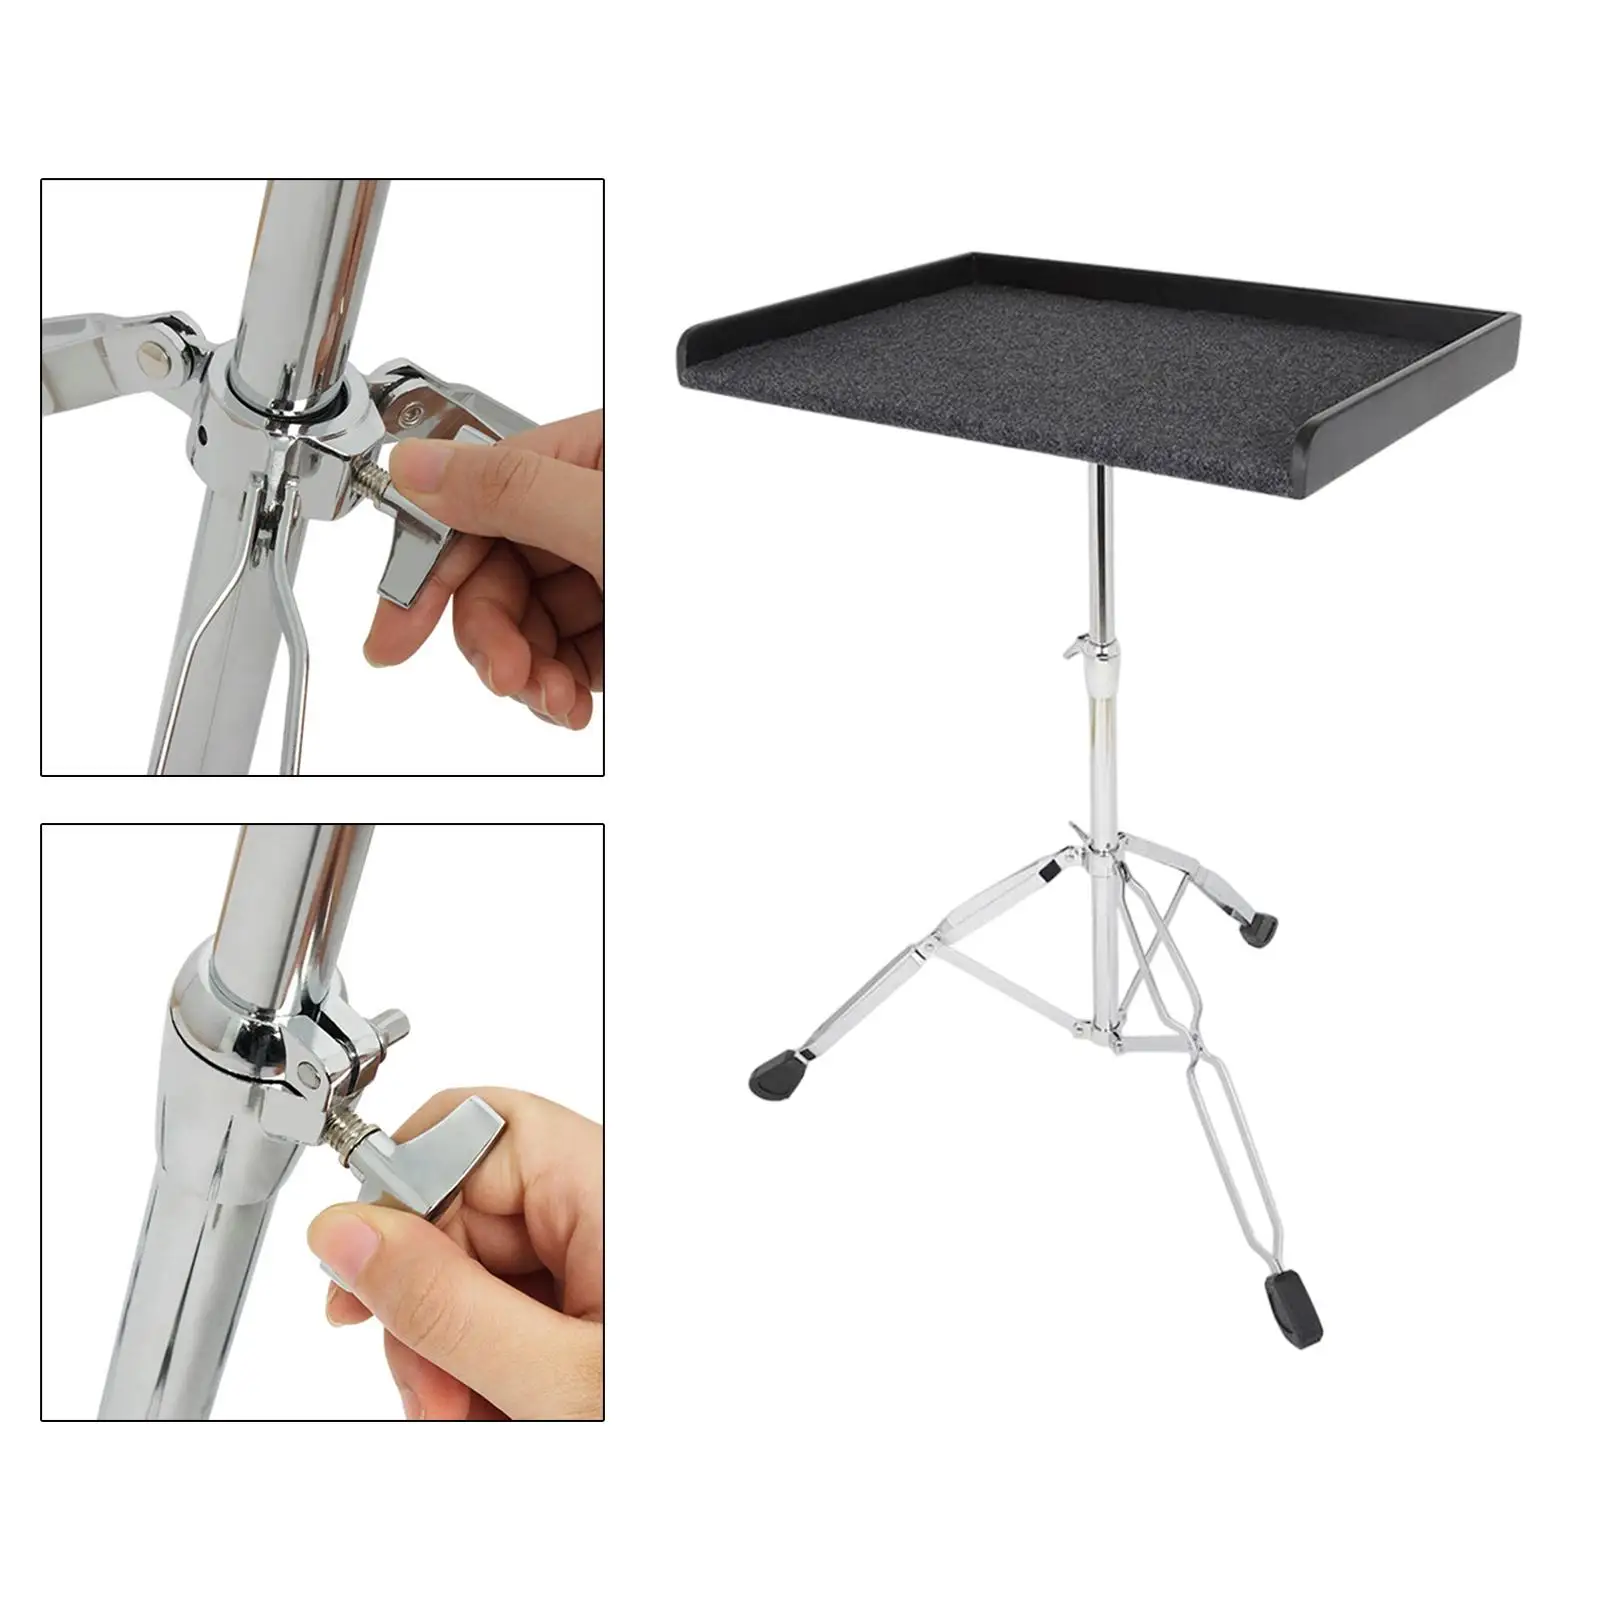 Professional Percussion Table Mount Holder Adjustable Thick EVA Padded DJ Laptop Anti Slip for Studio Easy to Carry Travel